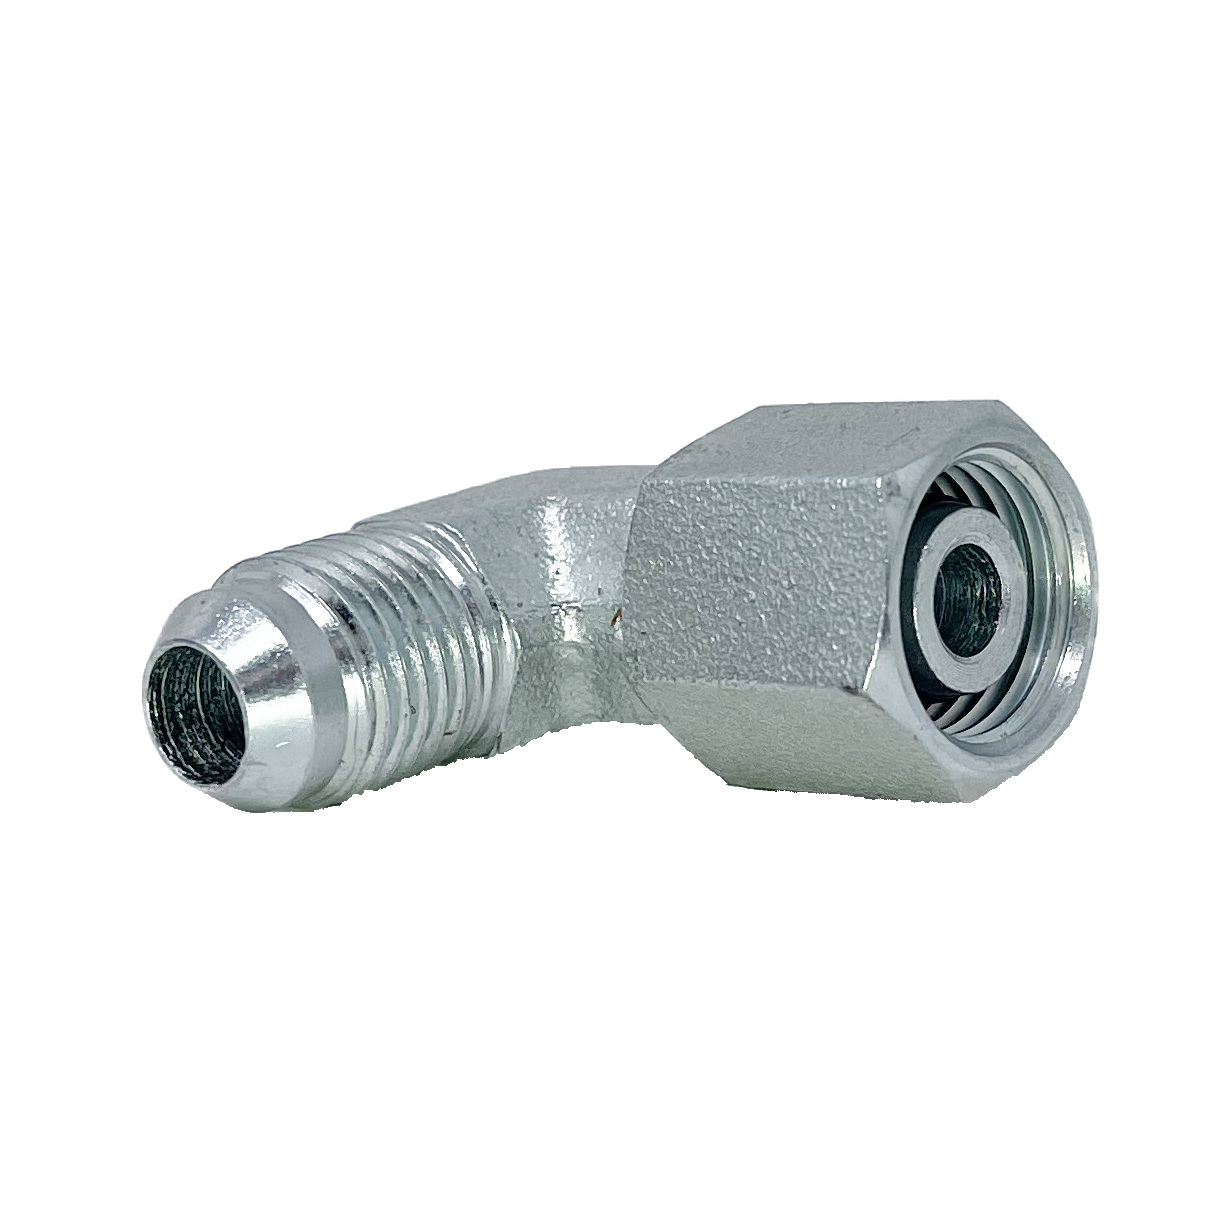 9199-12-S20-30 : Adaptall 90-Degree  Adapter, Male 0.75 (3/4") JIC x Female S20 DIN Tube, Carbon Steel